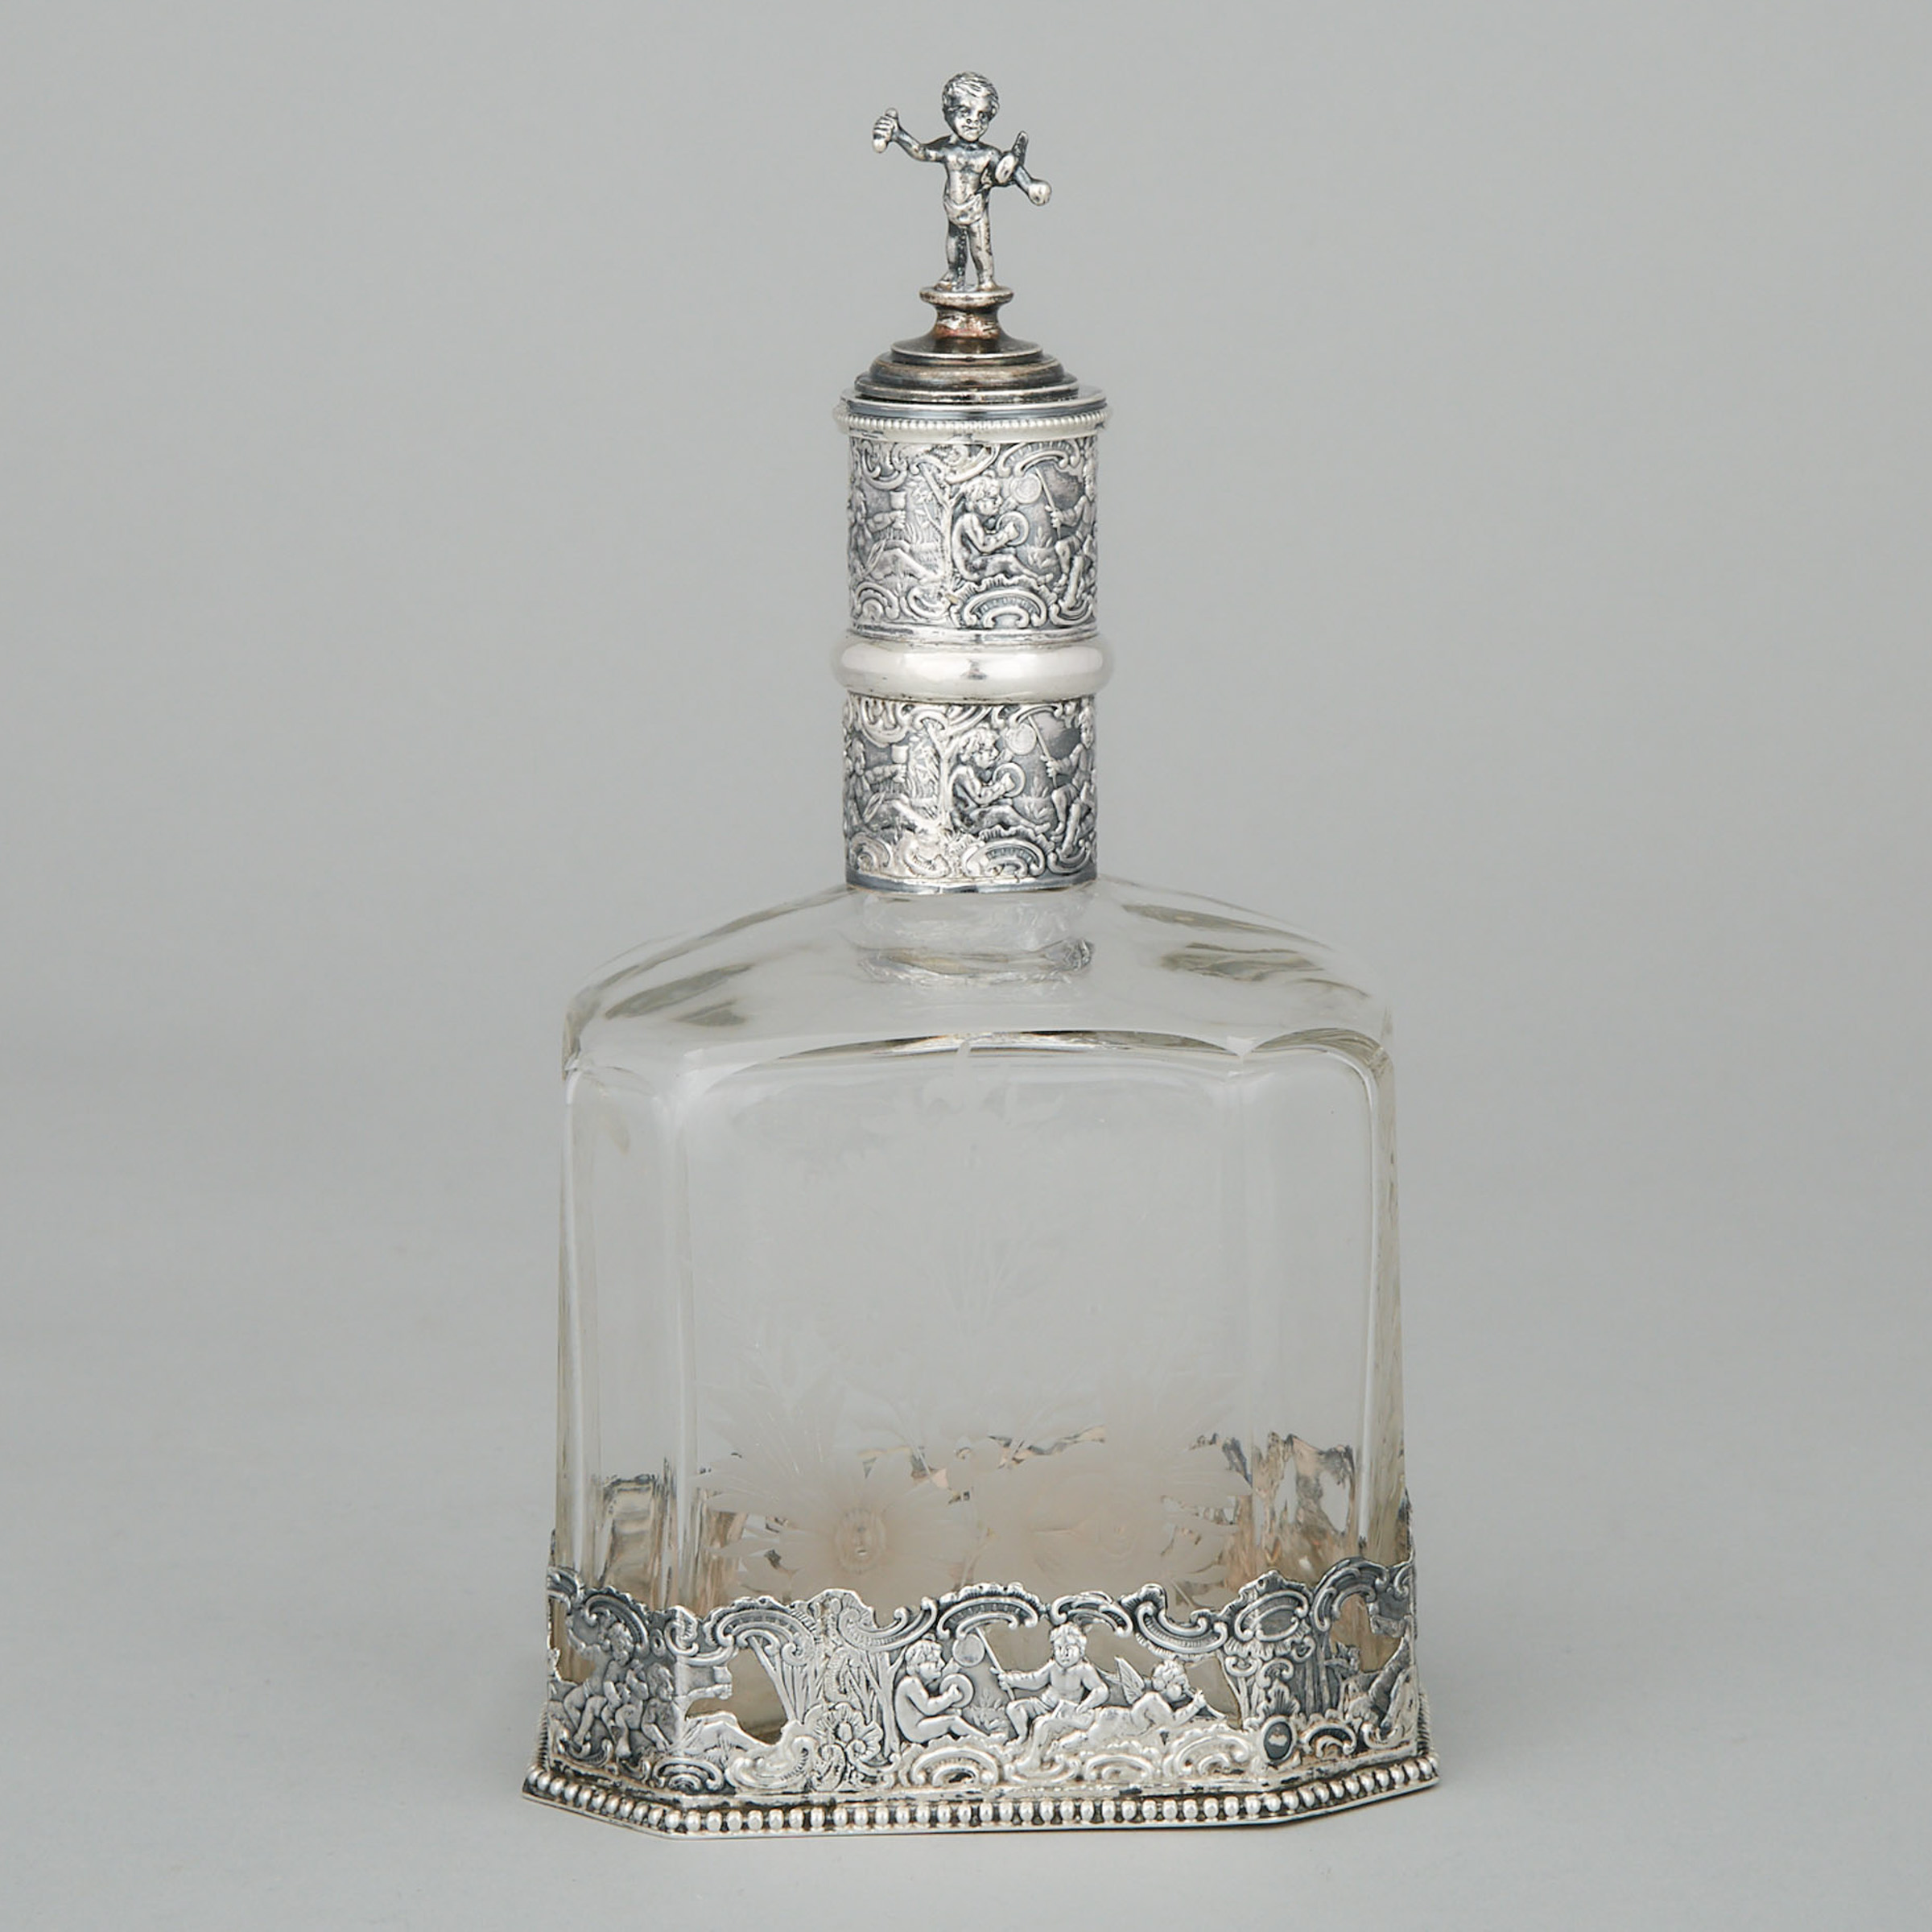 German Silver Mounted Etched Glass Decanter, Hanau, c.1900